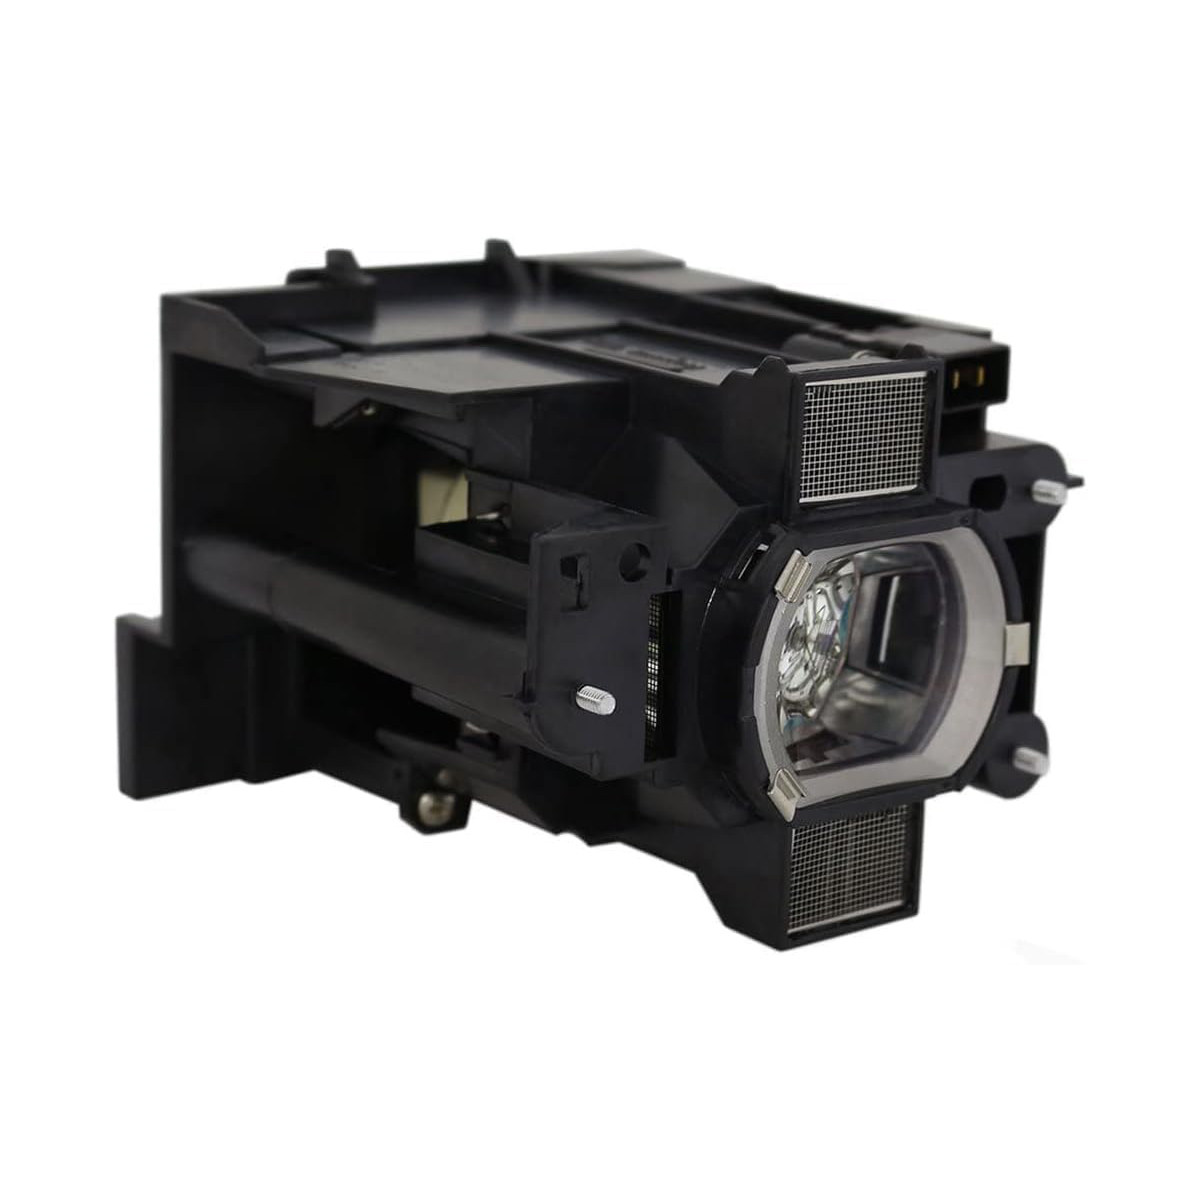 Replacement Projector lamp 003-120708-01 For CHRISTIE LW501i/LX601 /LX601i